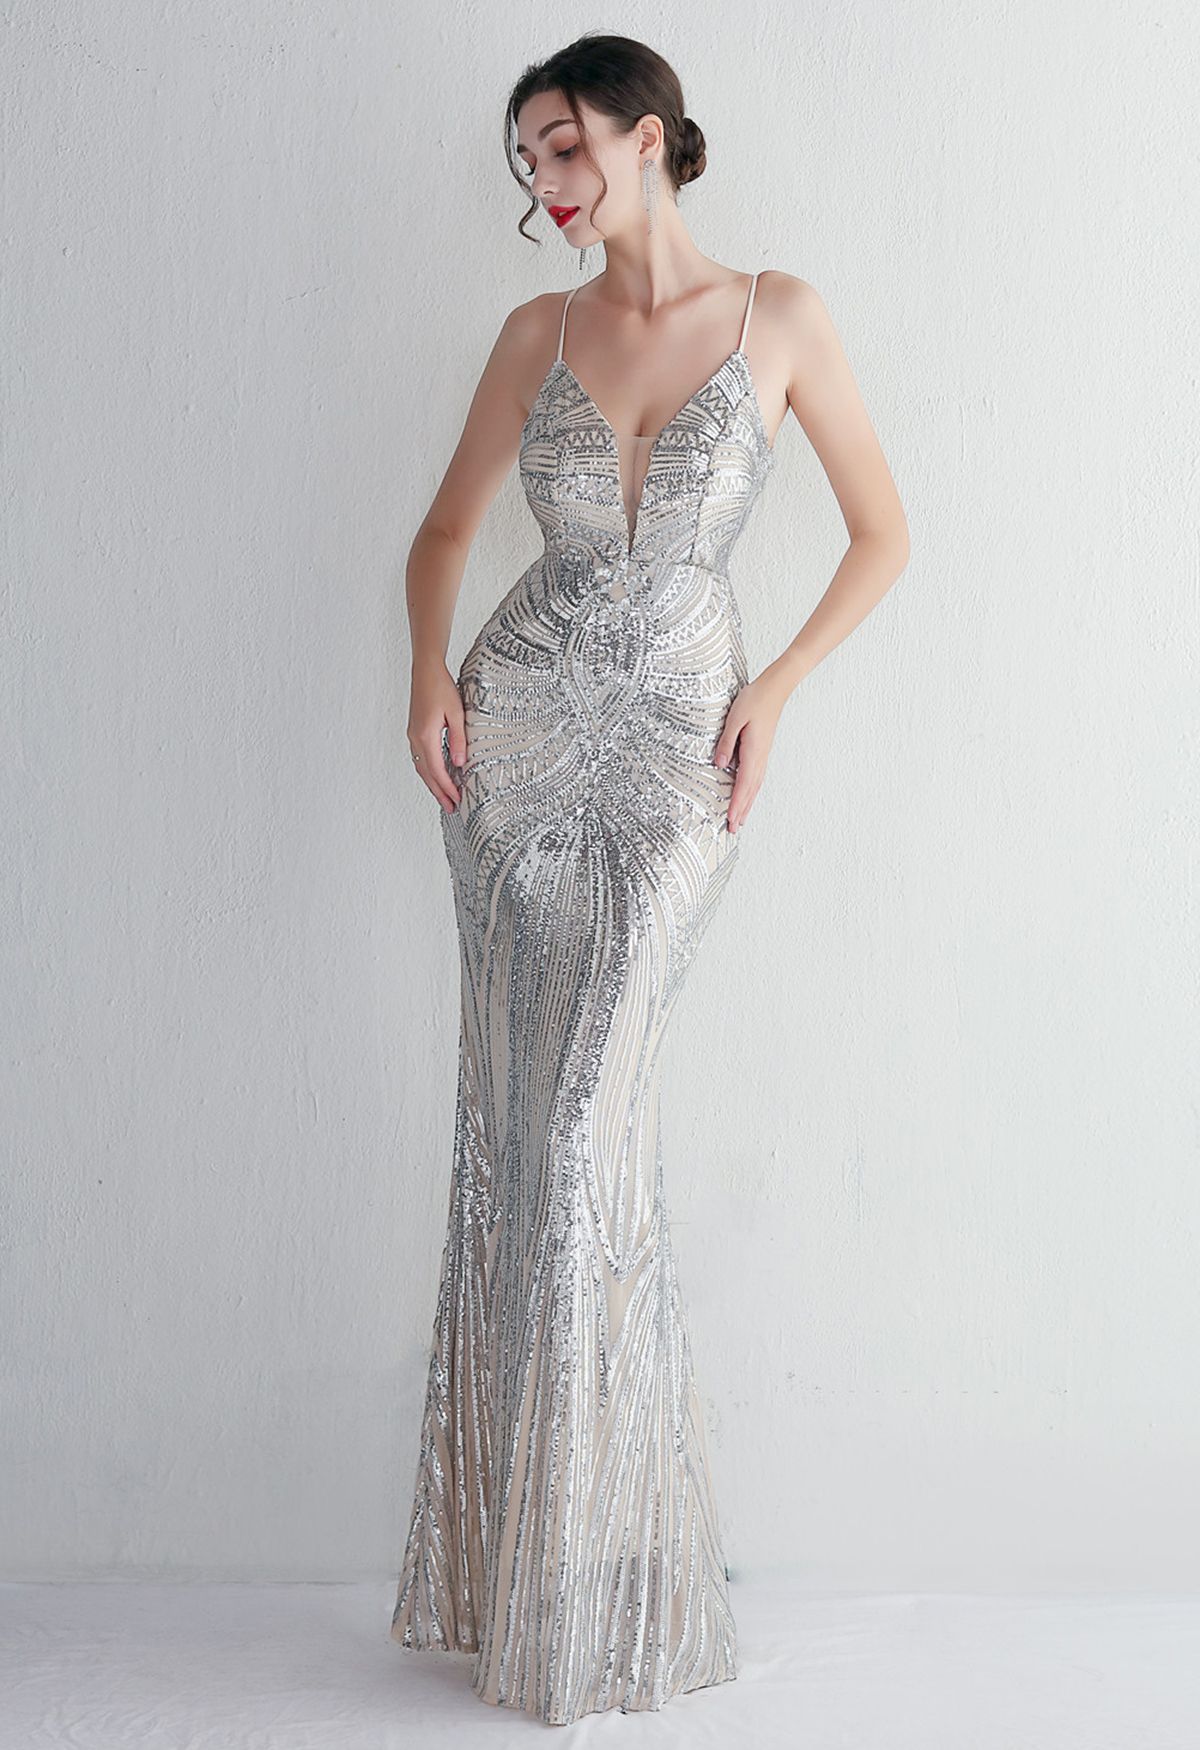 Glimmer Sequin Mermaid Cami Gown in Silver - Retro, Indie and Unique ...